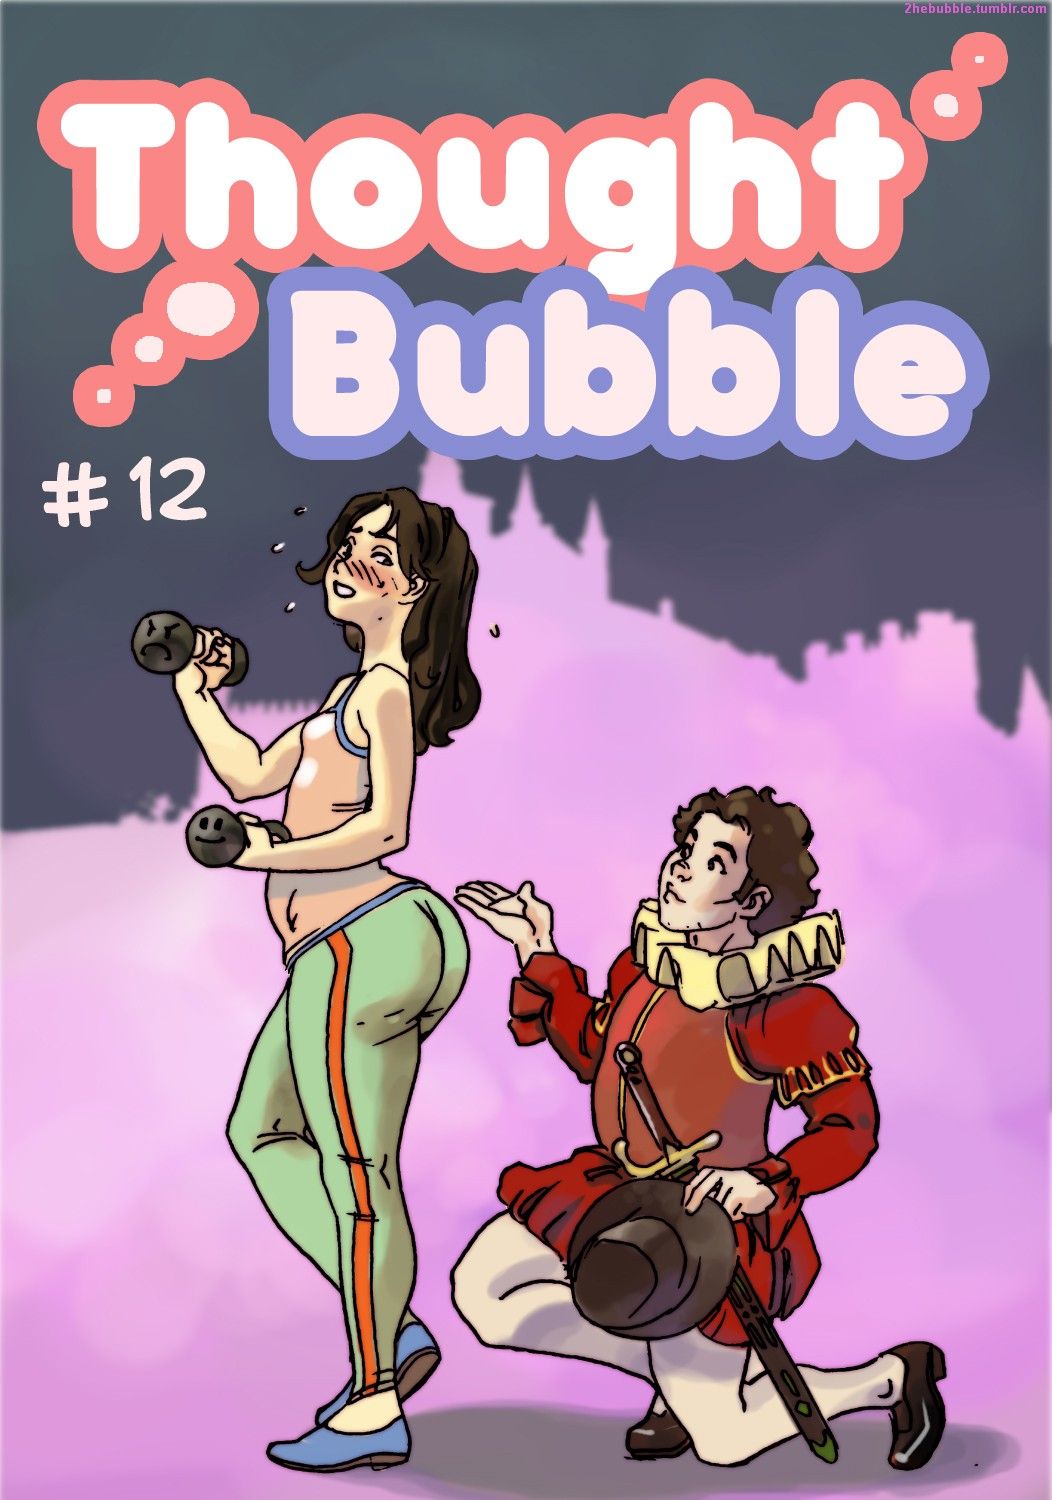 Sidneymt - Thought Bubble 12 13